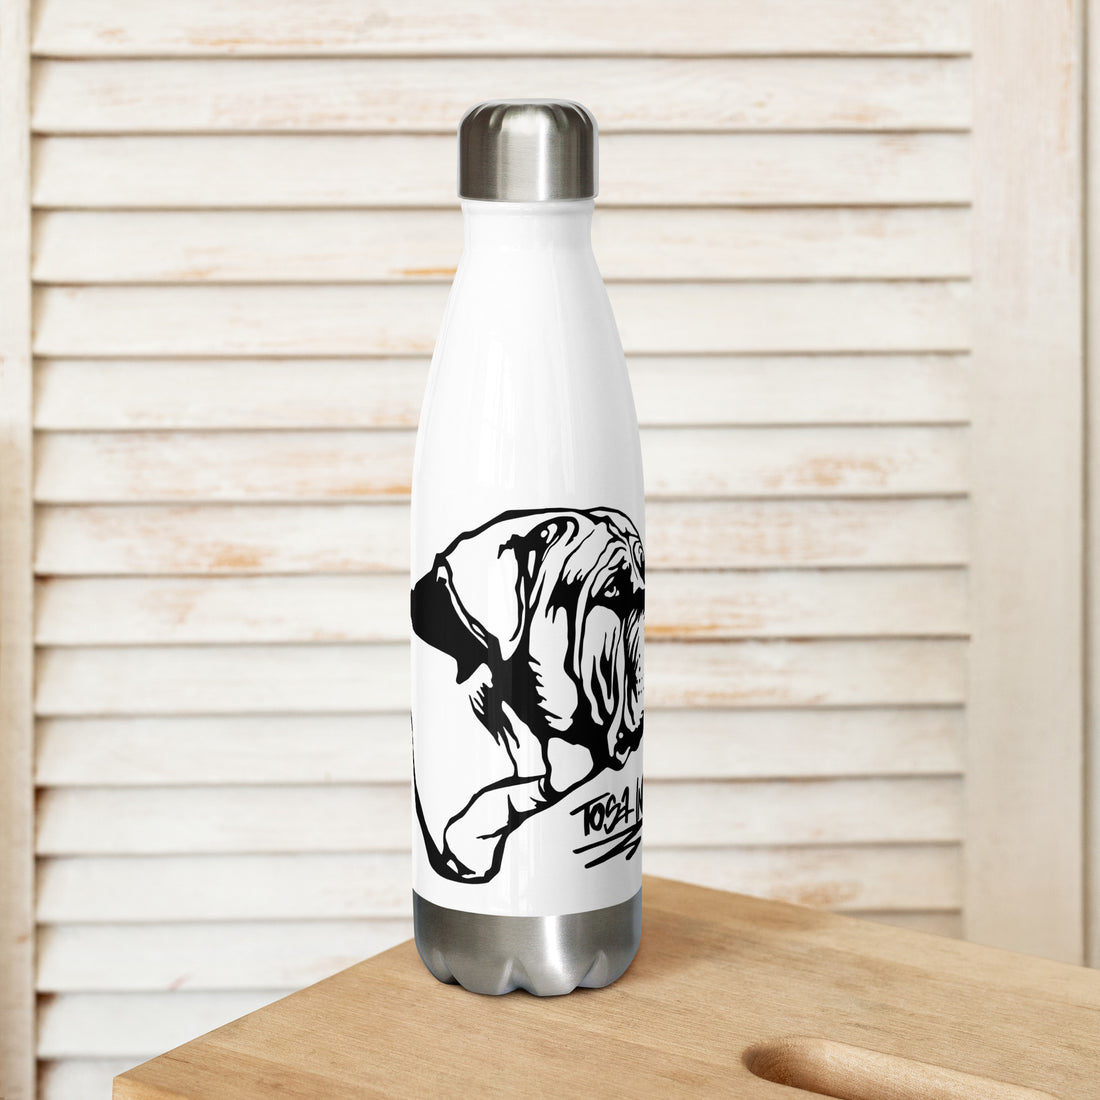 Stainless steel water bottle Tosa